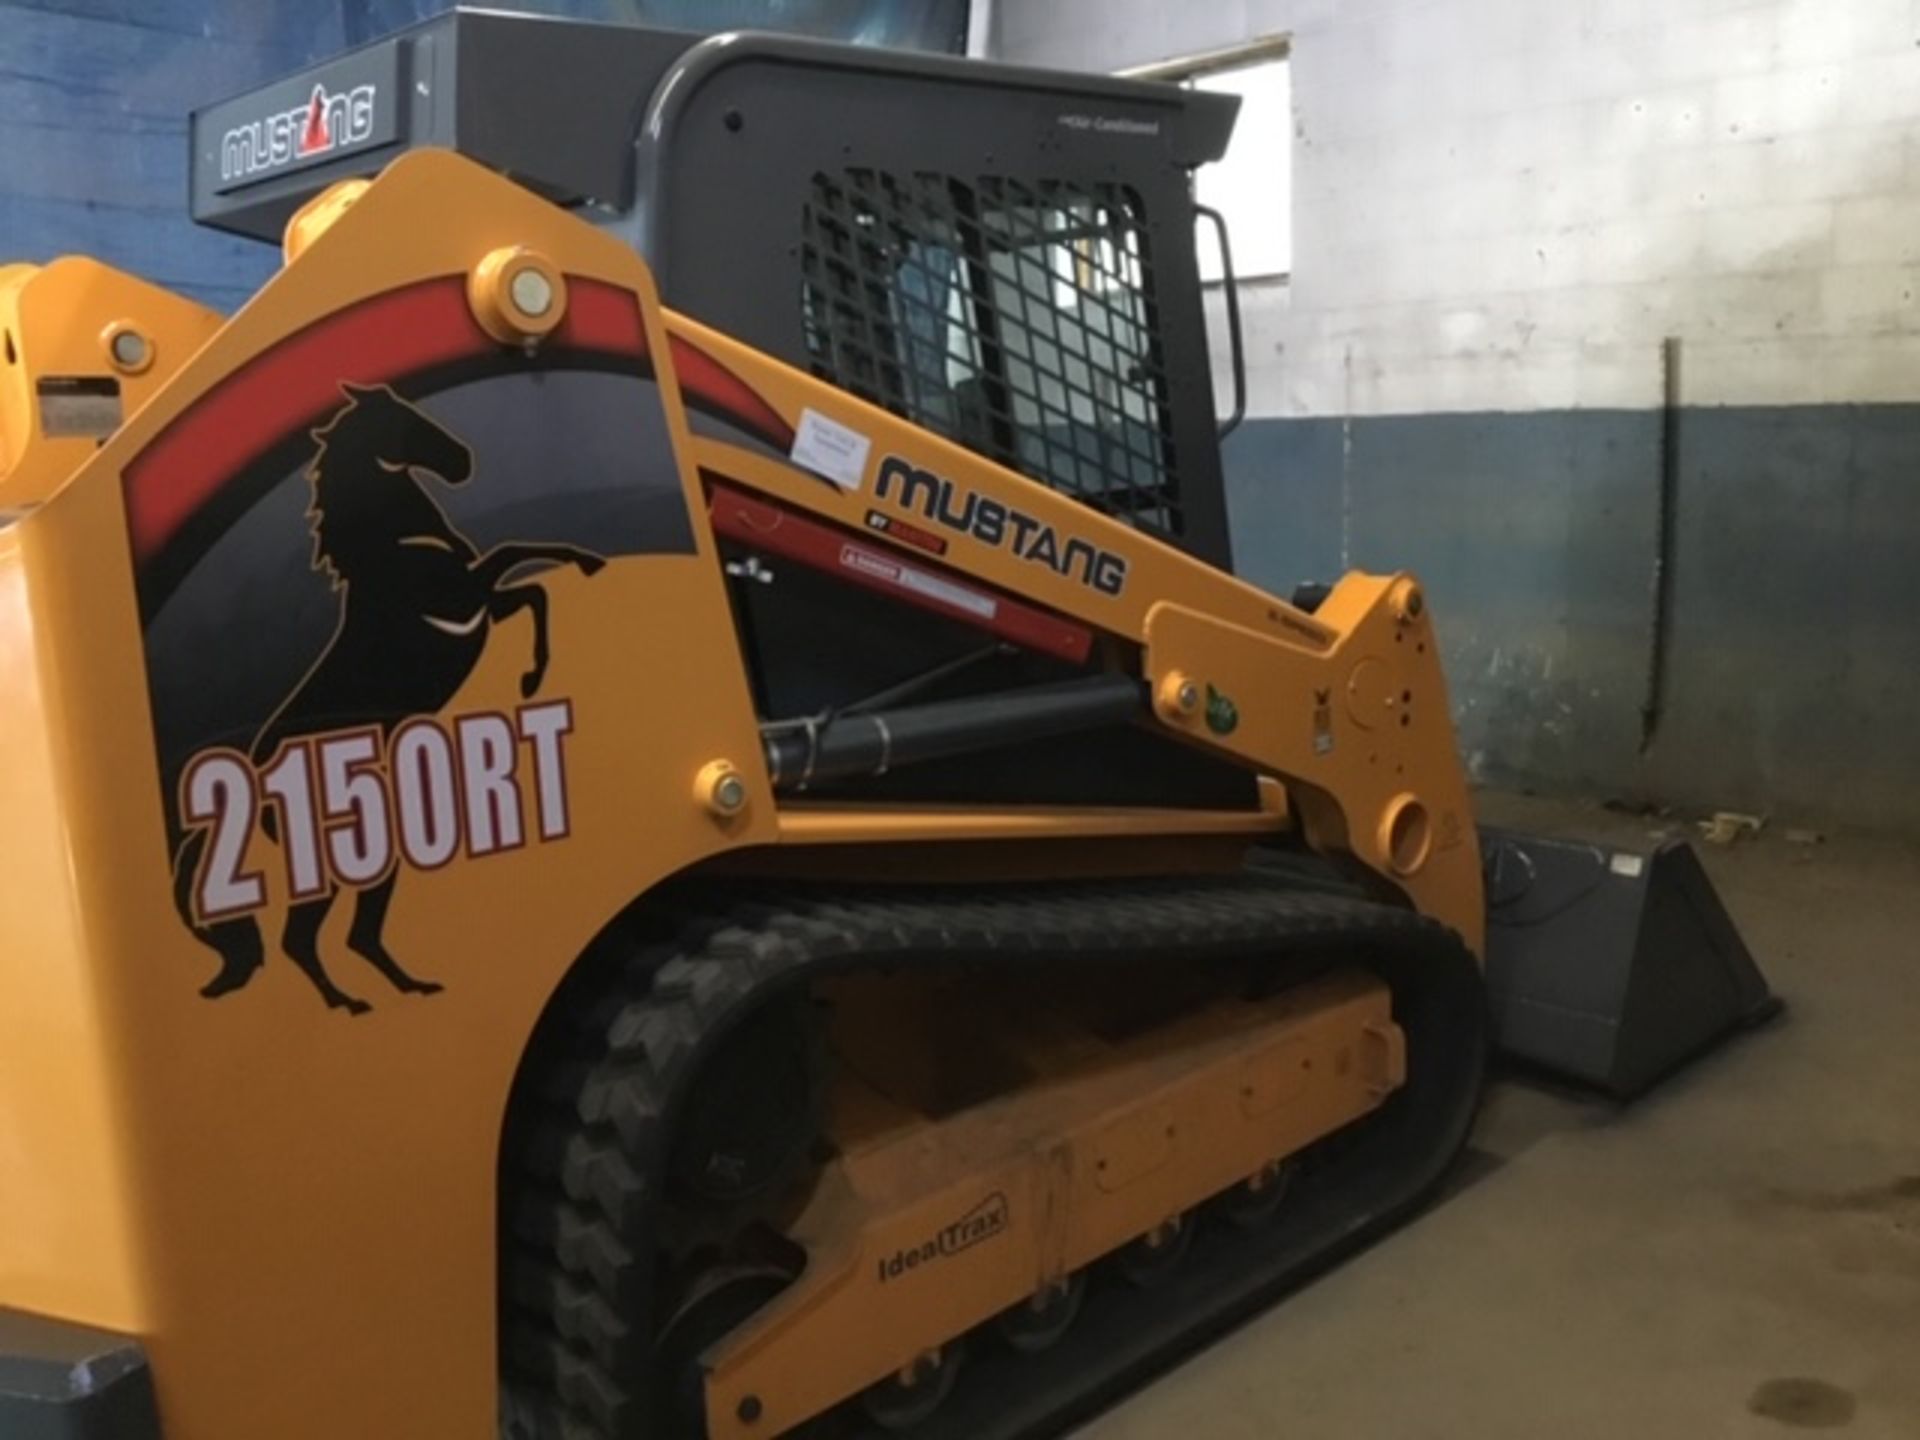 2018 MUSTANG TRACK SKID STEER #2150RT LOADER, HOURS 187, DELUXE AIR RIDE SUSPENSION, HEAT, A/C, SELF - Image 5 of 13